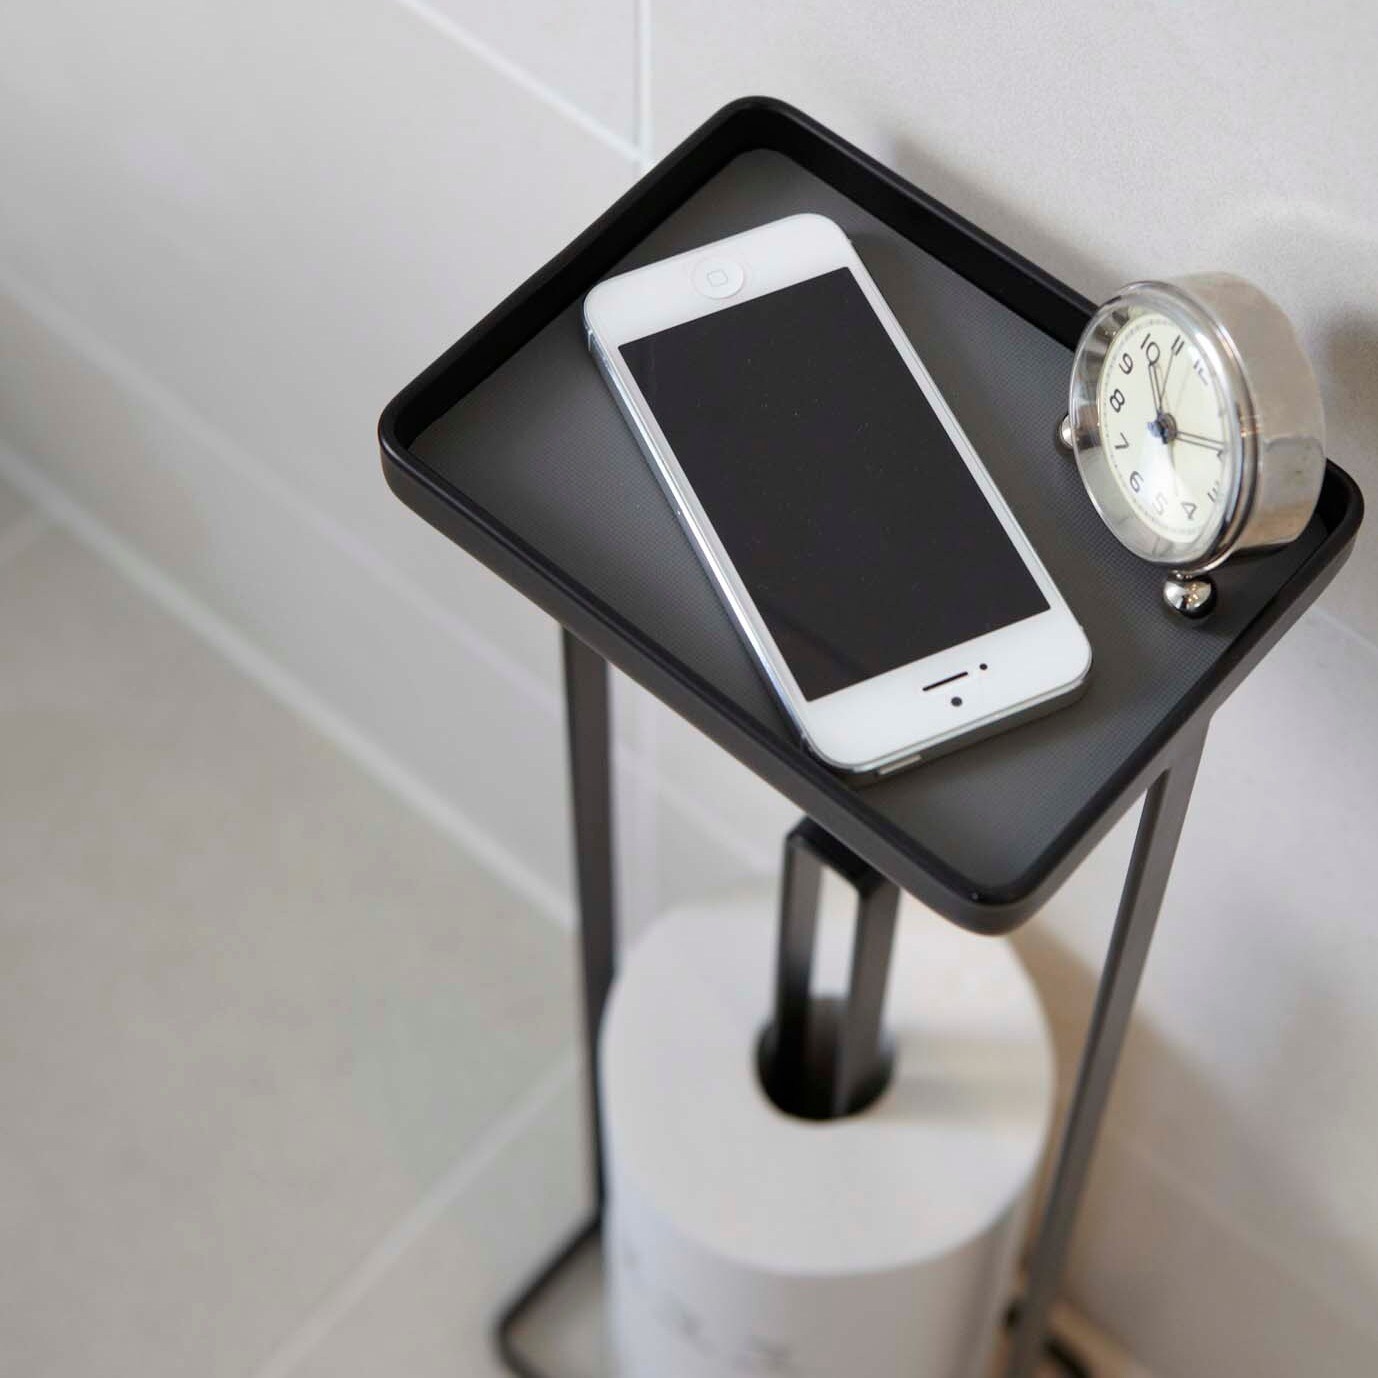 https://ak1.ostkcdn.com/images/products/14190042/Tower-Toilet-Paper-Stand-with-Tray-by-Yamazaki-Home-20476b71-c144-4b26-a298-4330fbc4f2d6.jpg